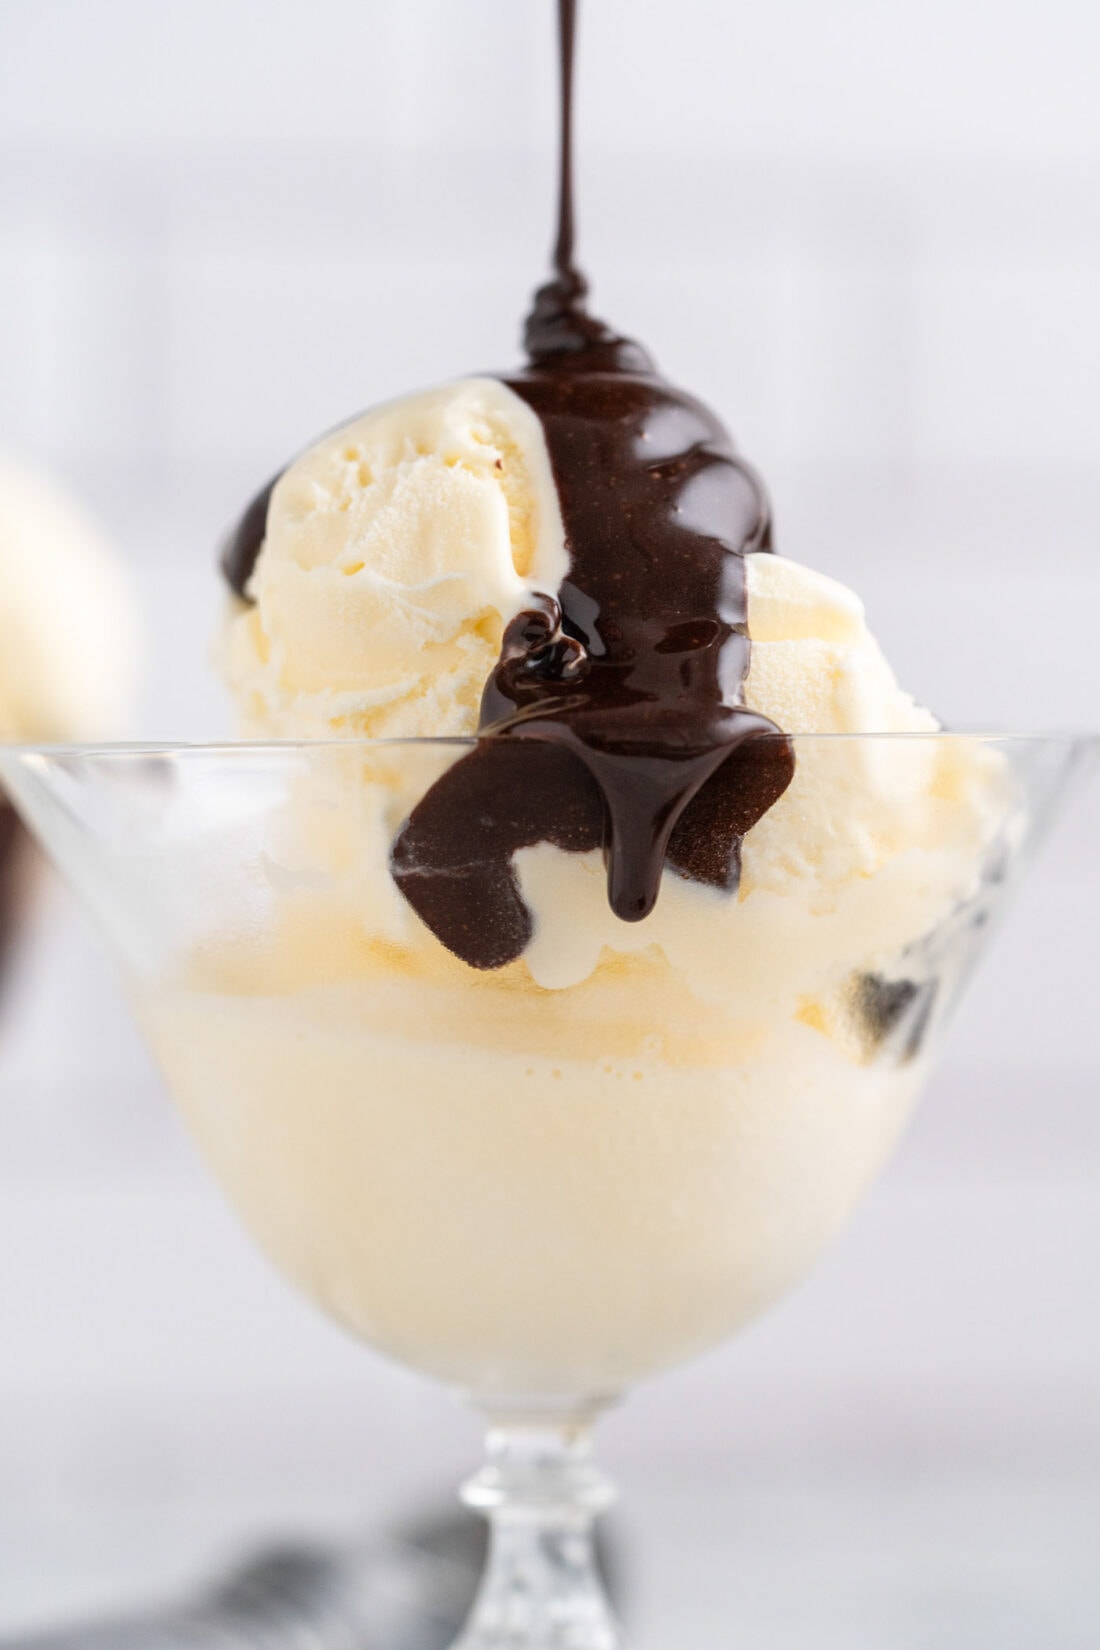 Hot Fudge being drizzled over ice cream